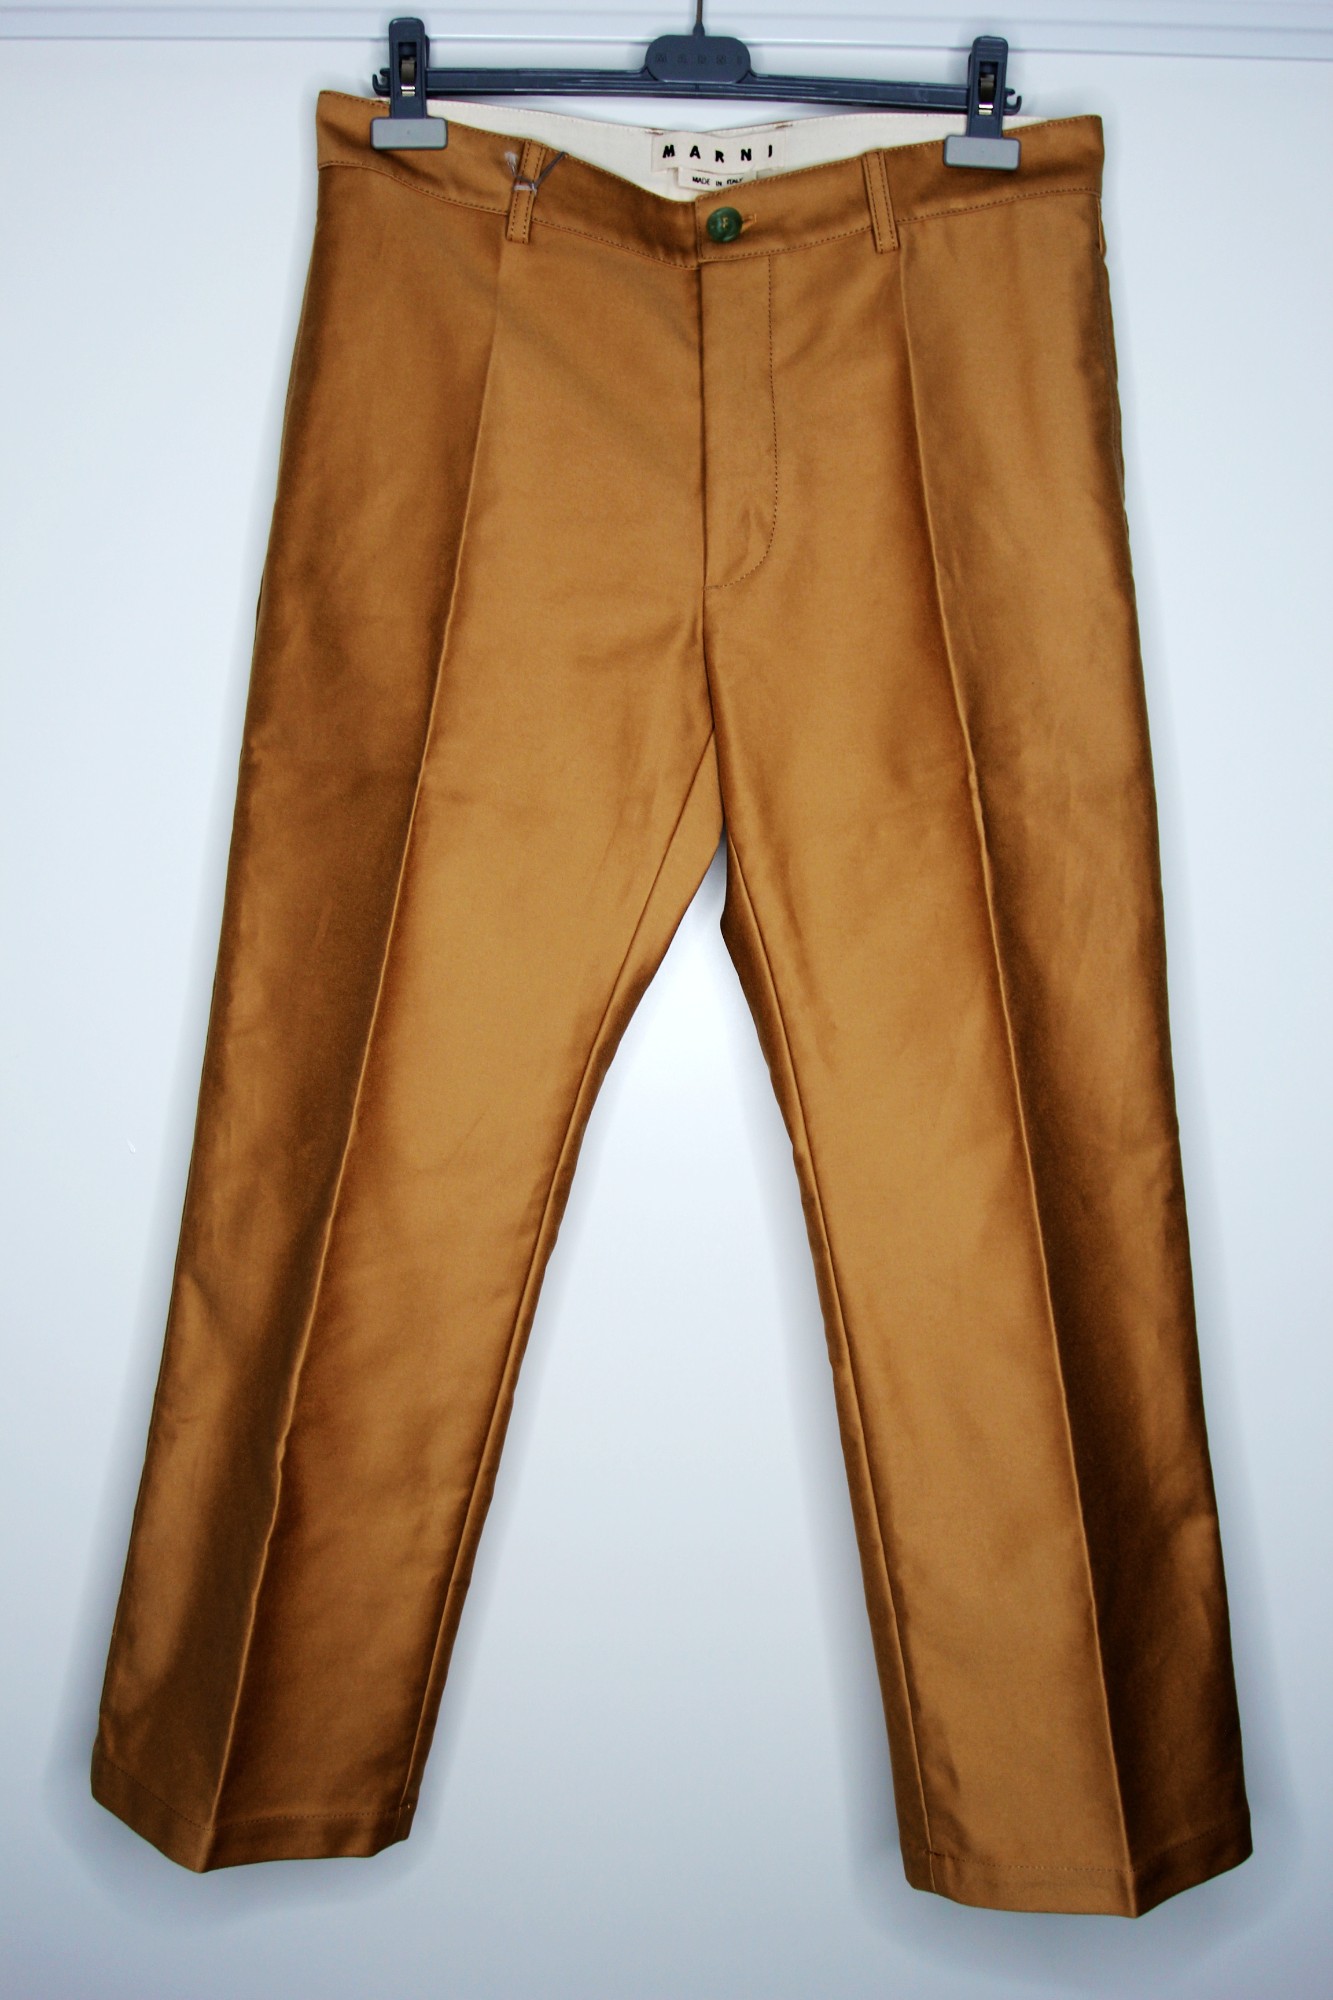 BNWT SS20 MARNI STRUCTURED COTTON PANTS 50 - 2